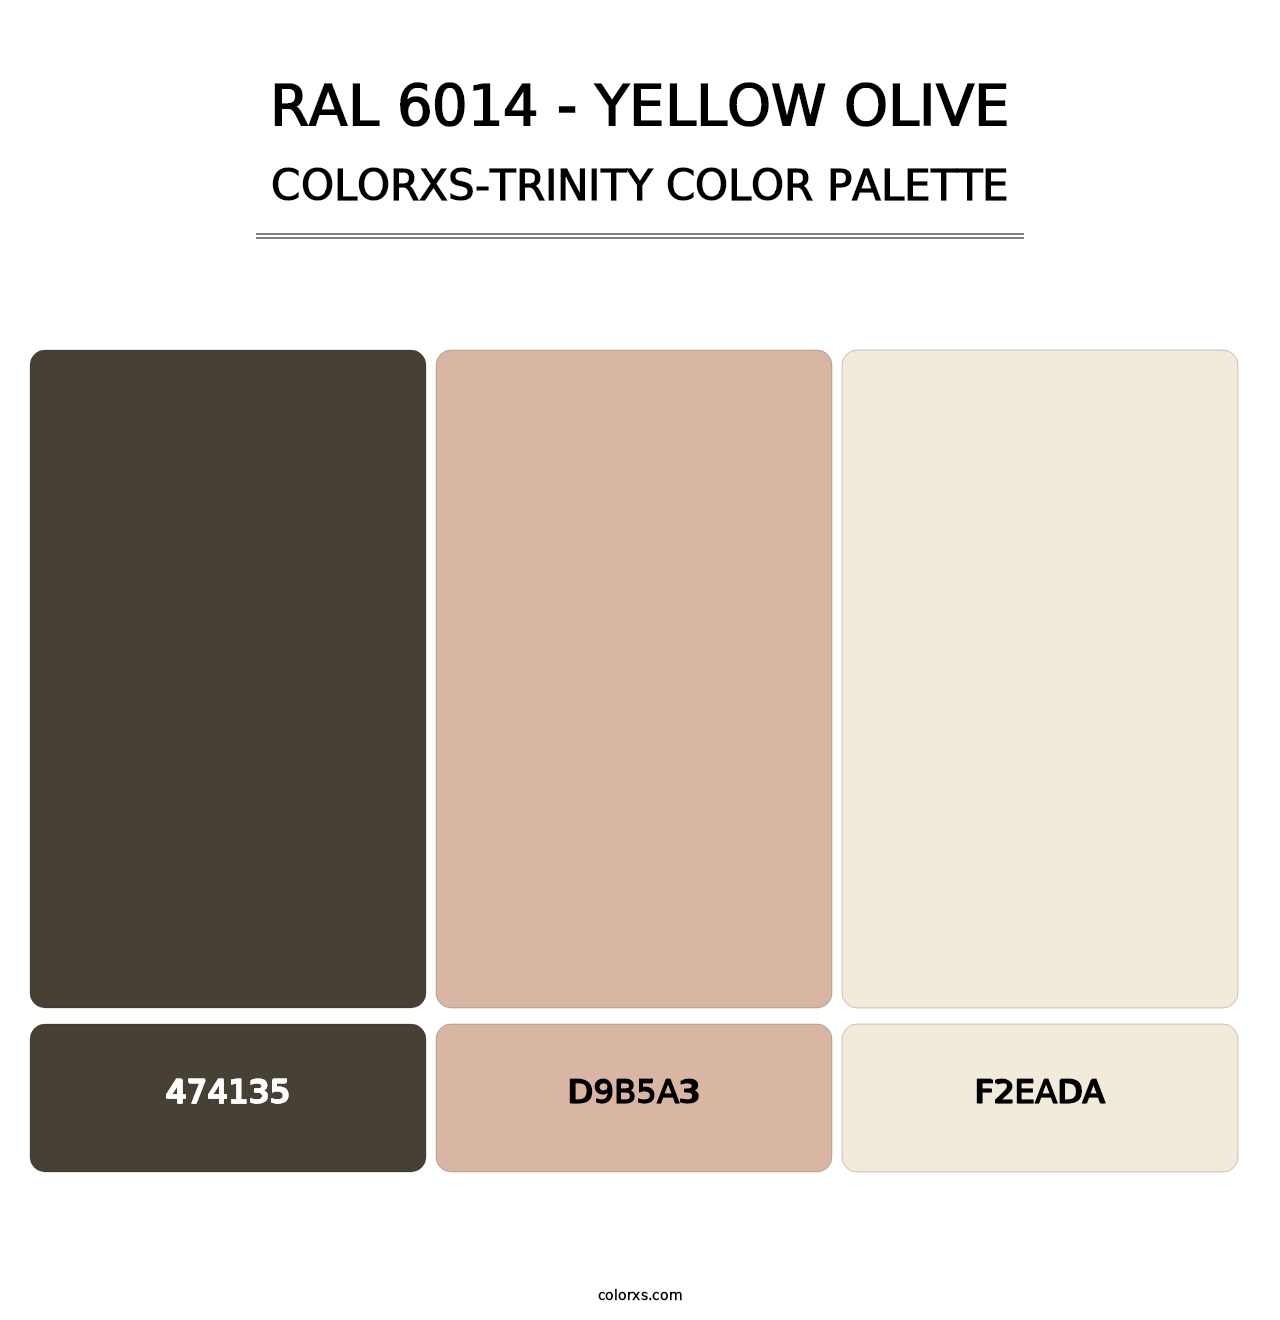 RAL 6014 - Yellow Olive - Colorxs Trinity Palette